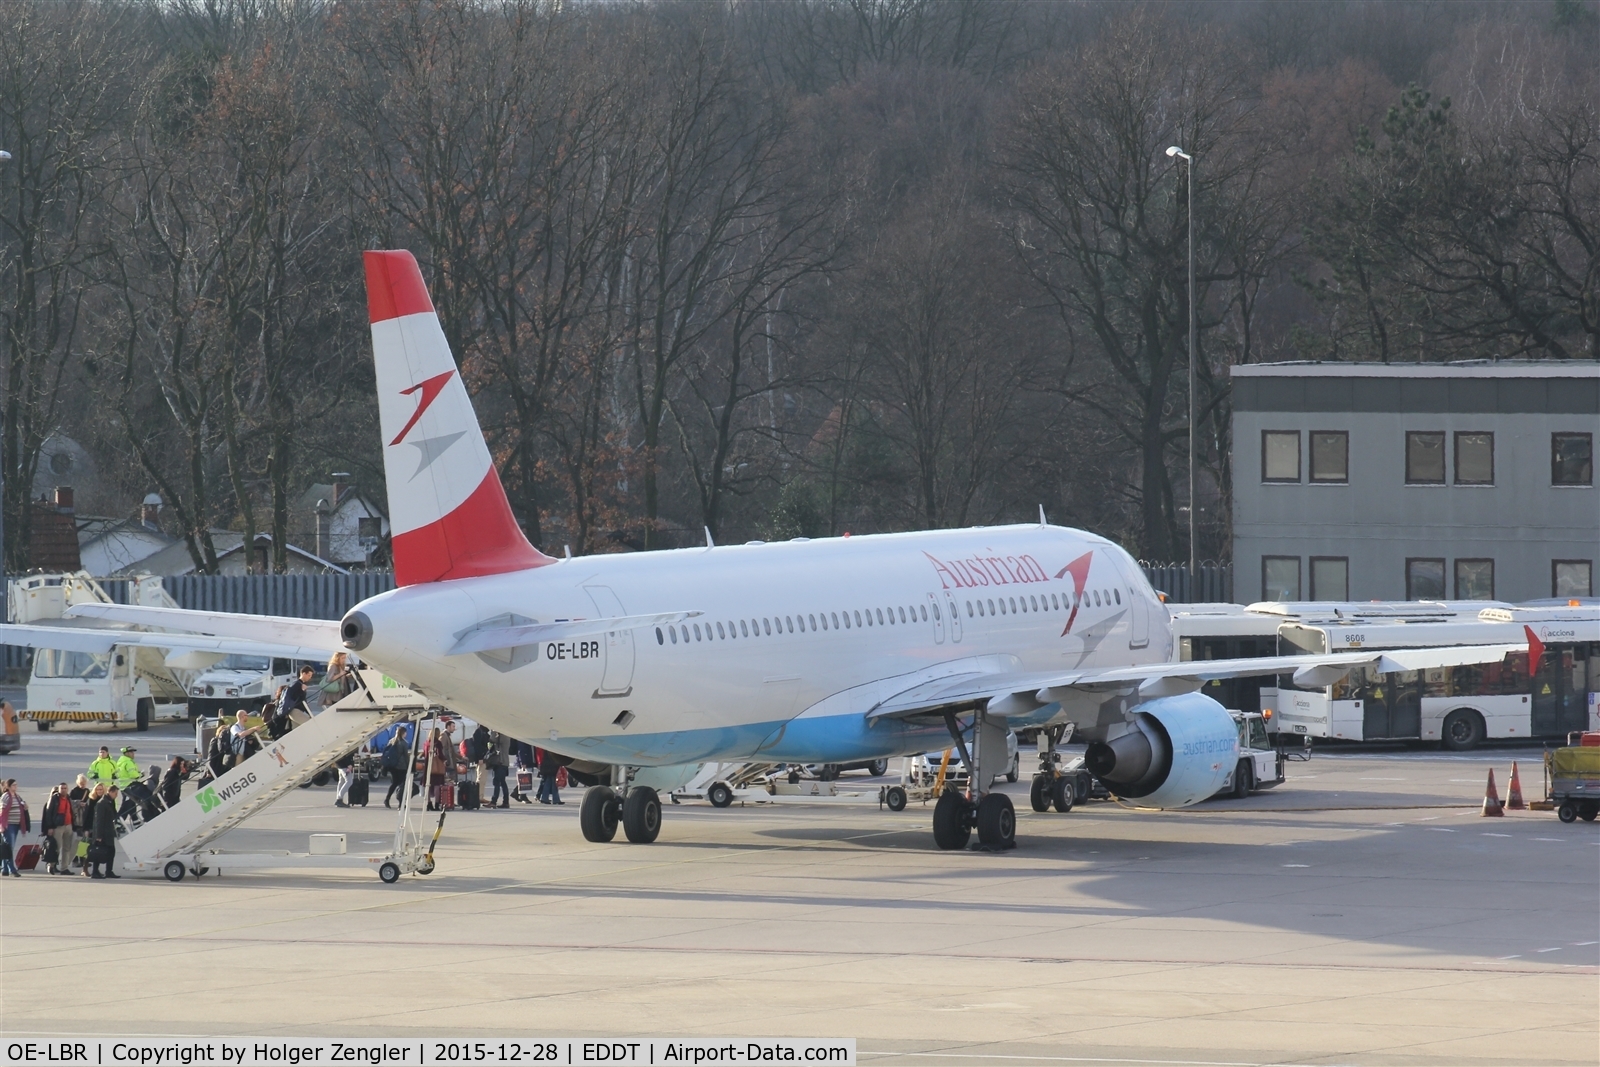 OE-LBR, 2000 Airbus A320-214 C/N 1150, Boarding time for a short jump to VIE....